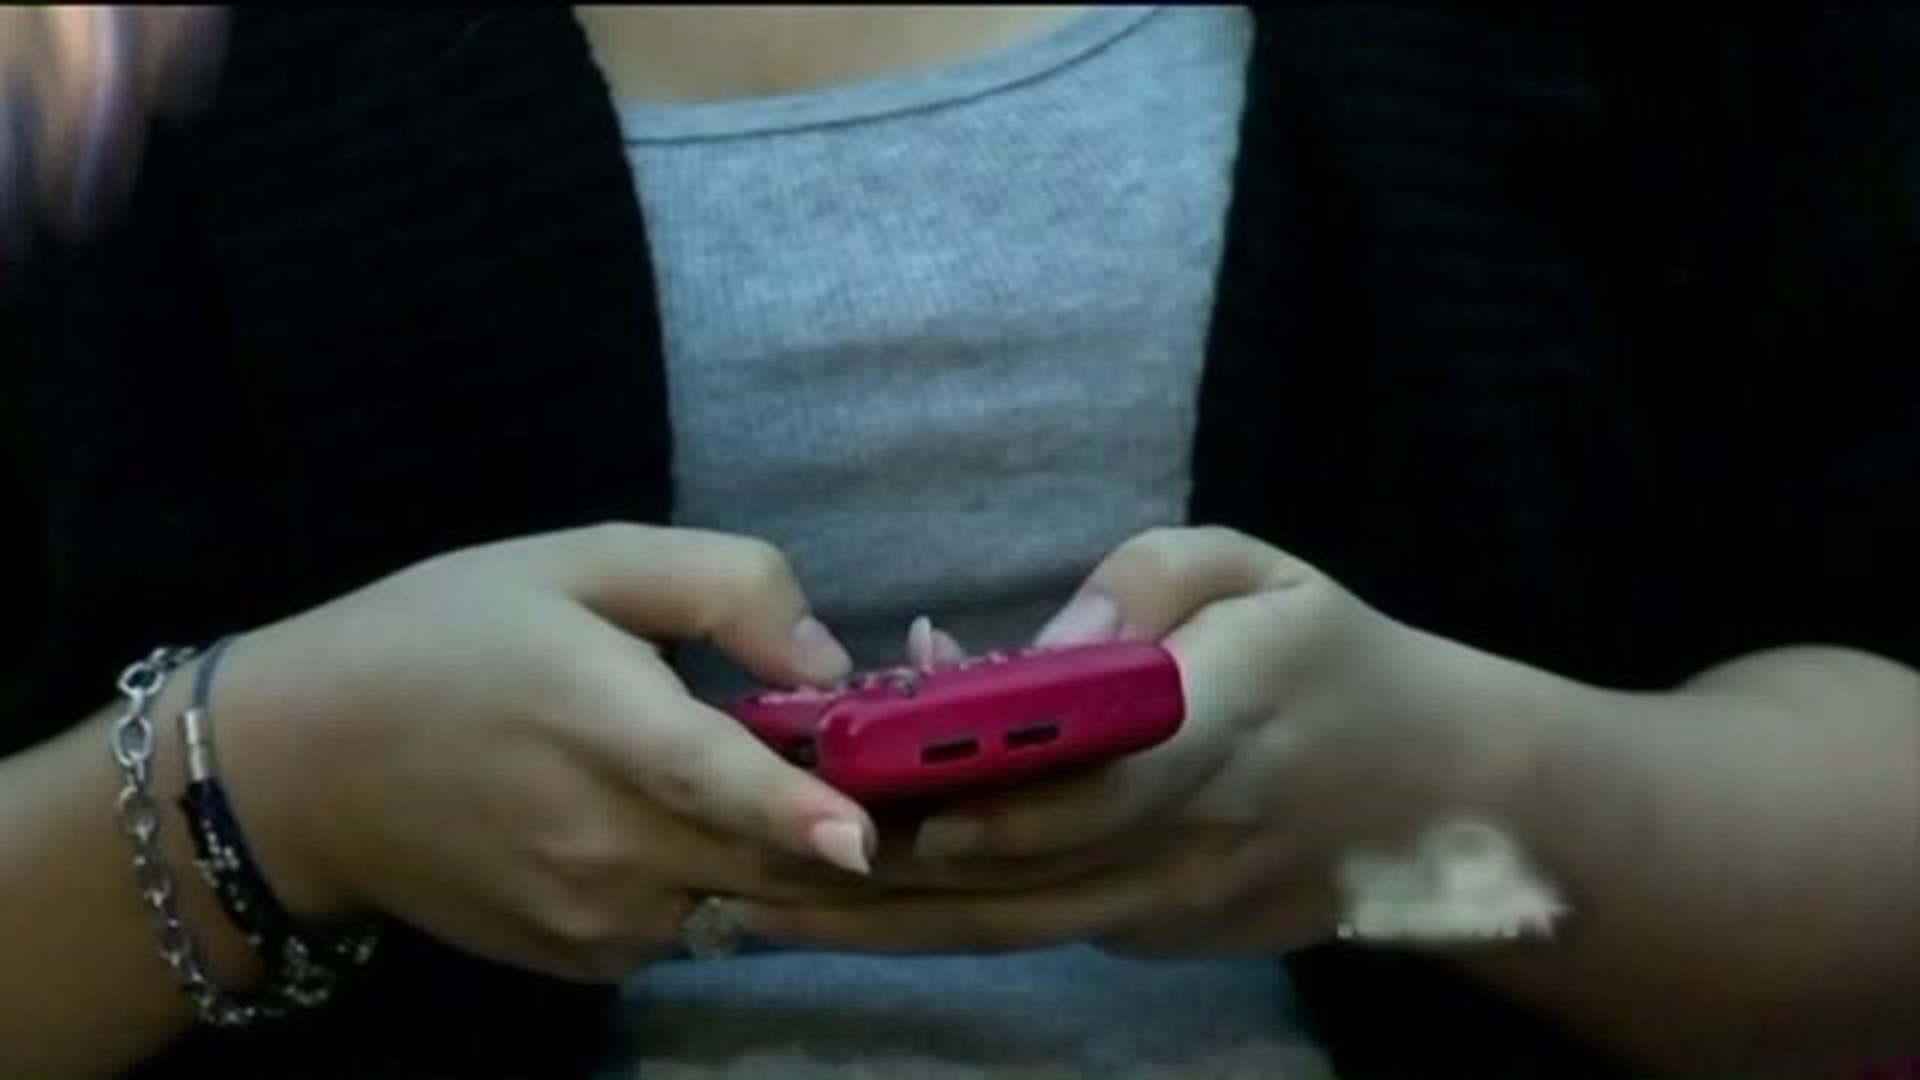 Teenxvideo Com - Sexting or child porn? Naugatuck teen faces legal issues after sending  explicit photos of herself | fox61.com